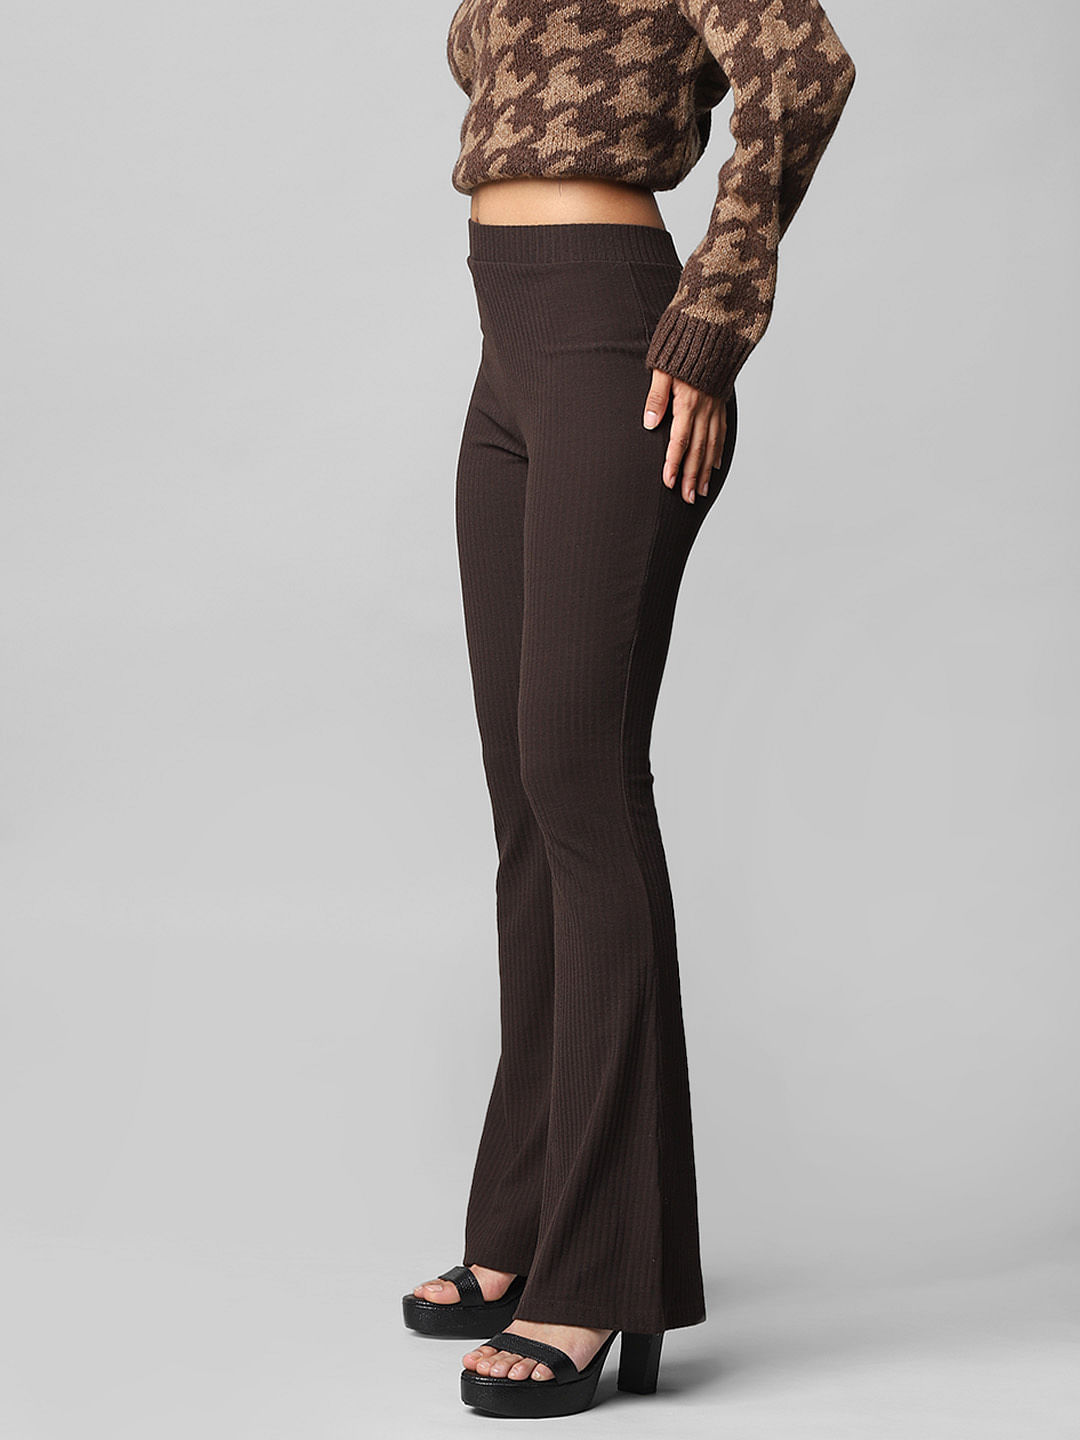 Flared Trousers - Buy Flared Trousers online in India